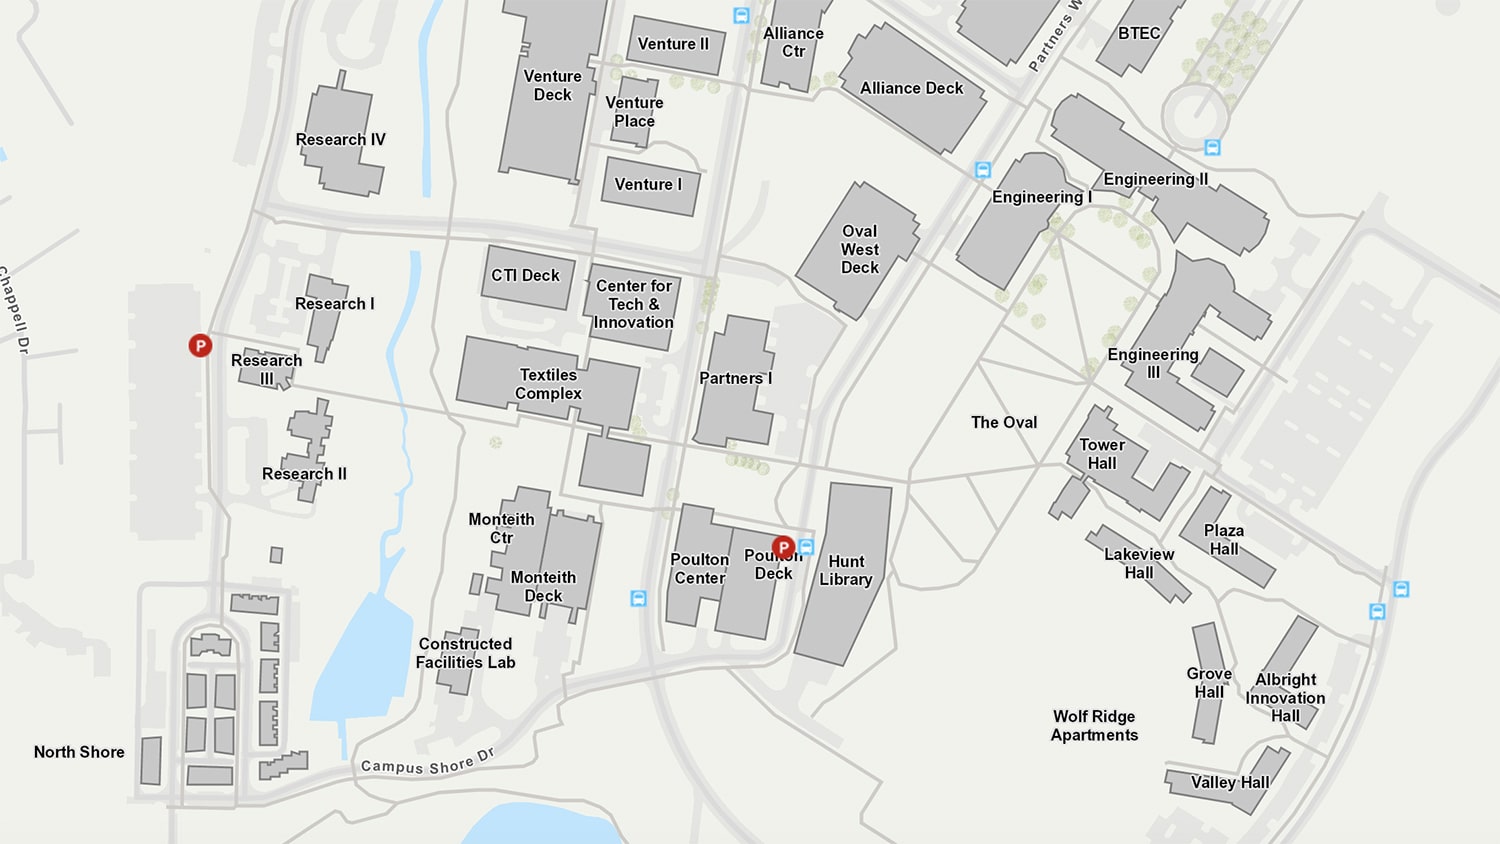 A segment of a map of NC State's Centennial Campus.